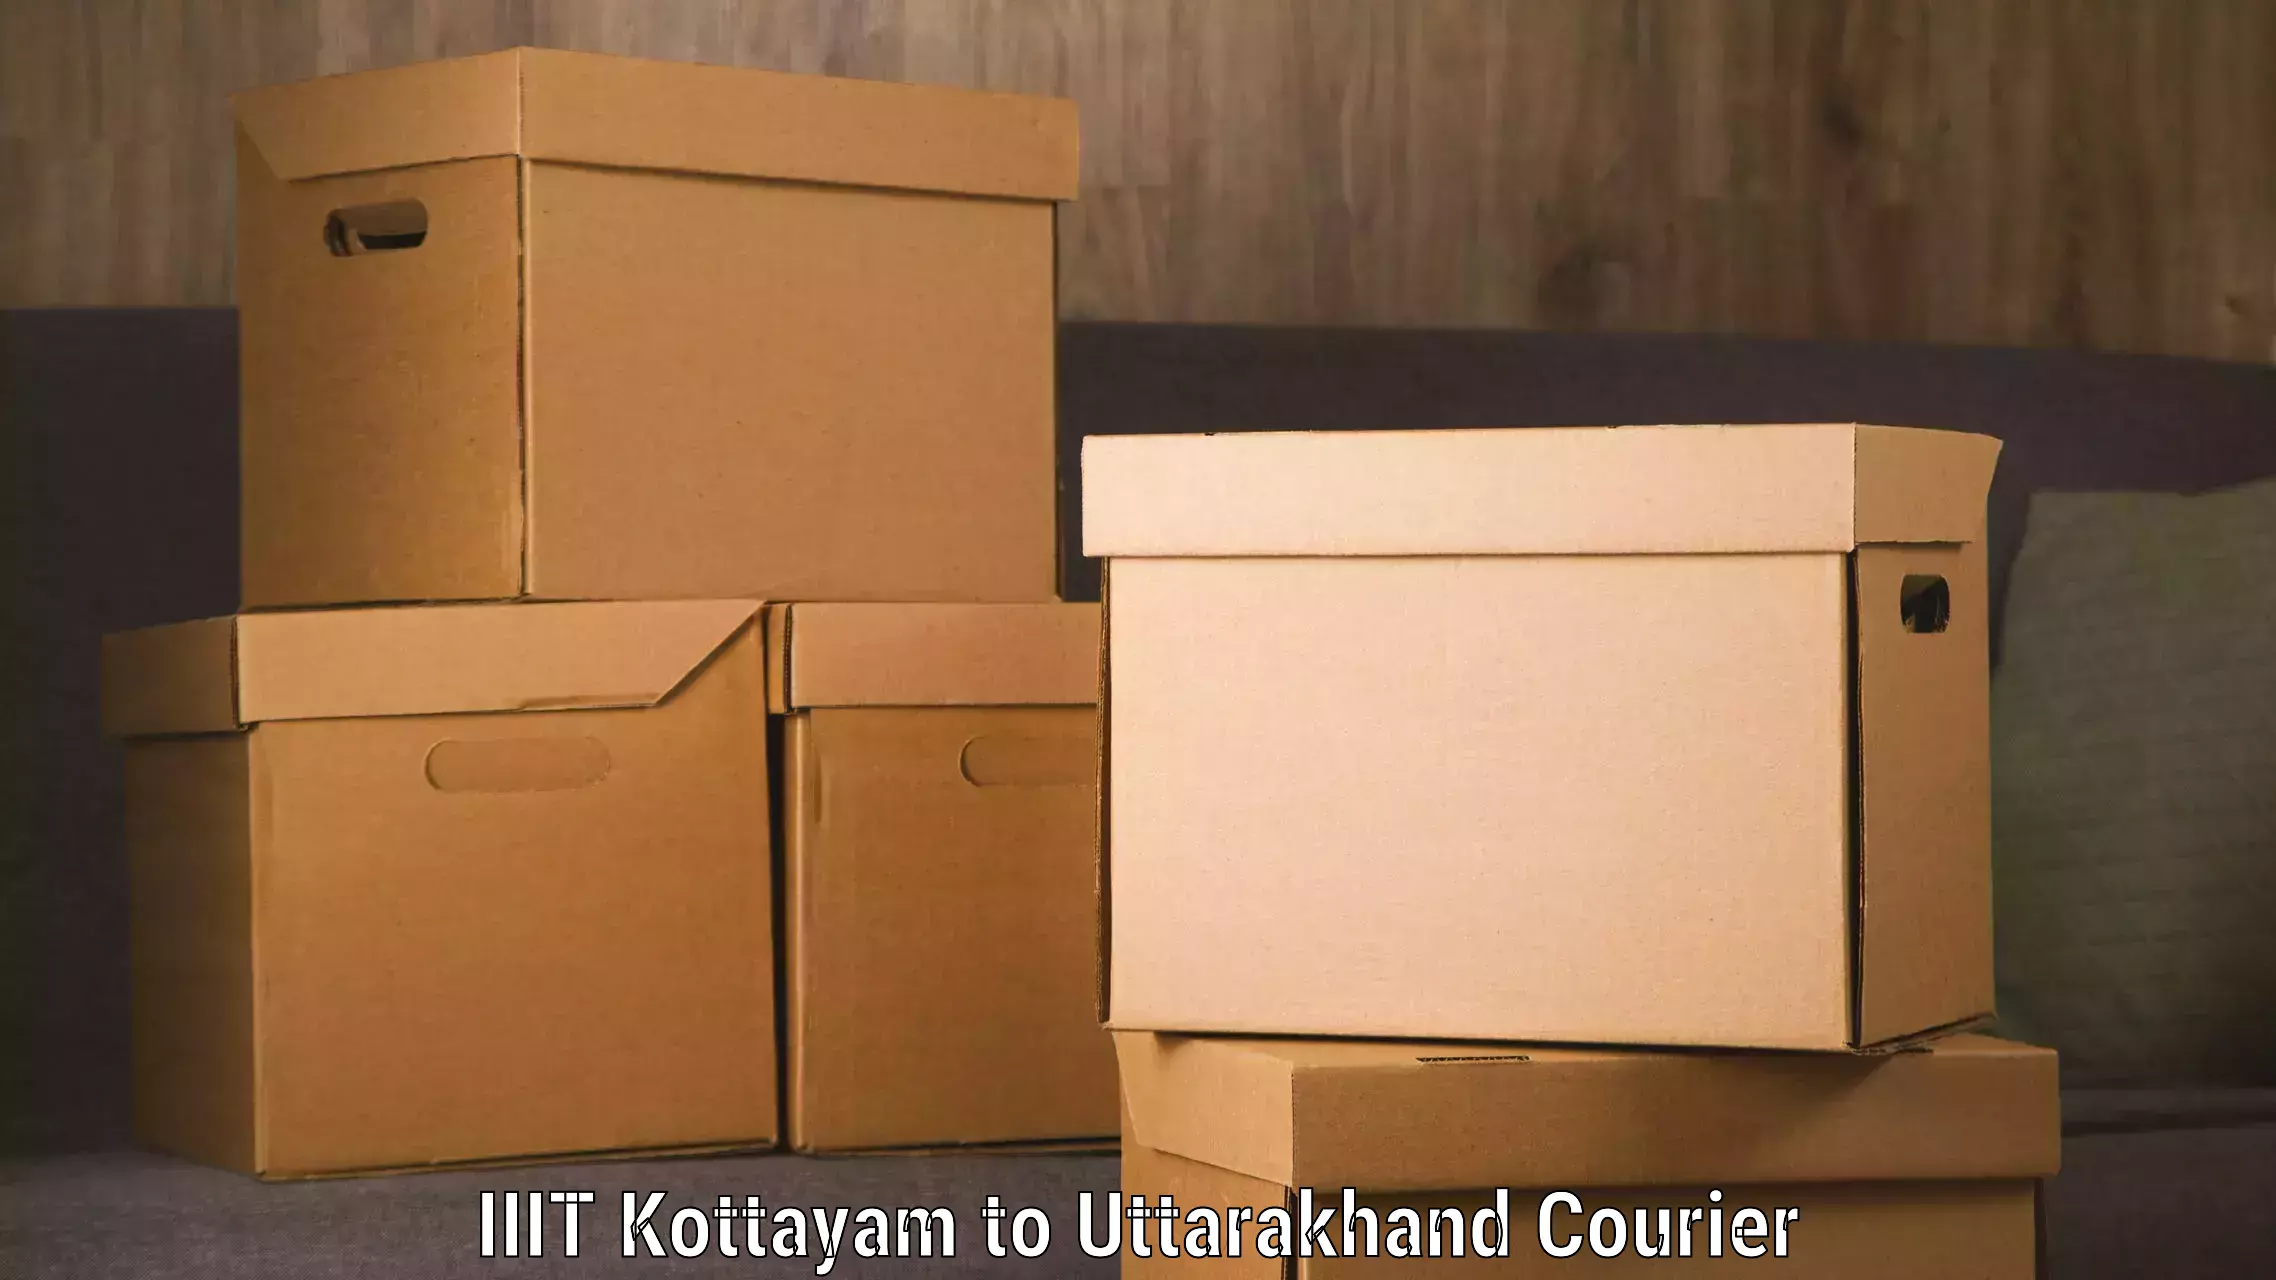 Express mail solutions IIIT Kottayam to Lohaghat